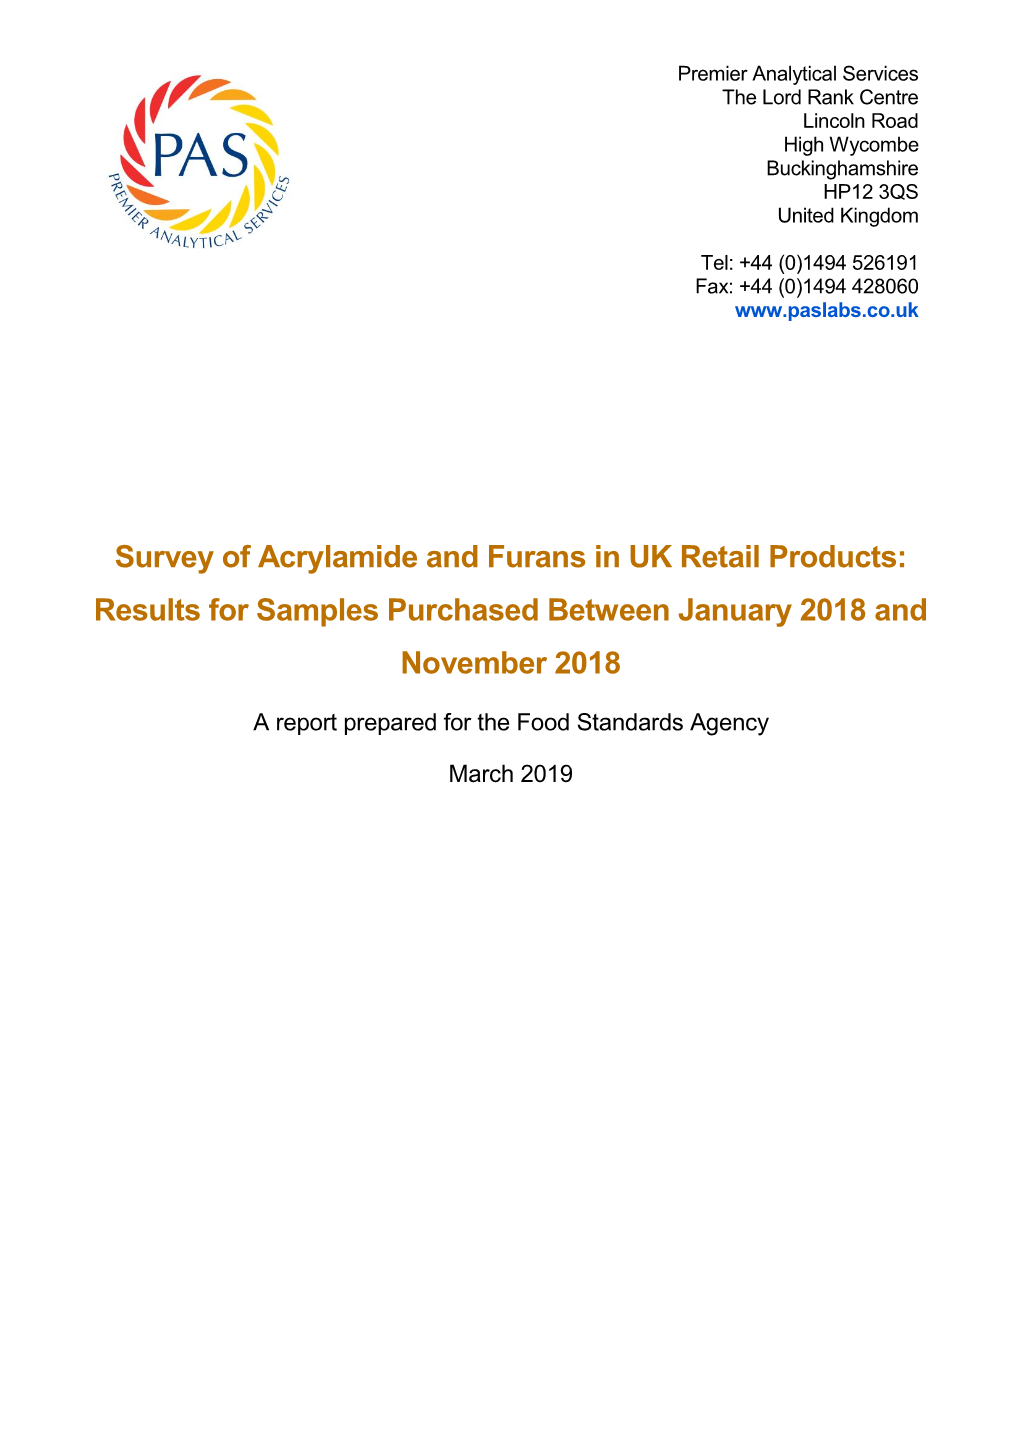 Survey of Acrylamide and Furans in UK Retail Products: Results for Samples Purchased Between January 2018 and November 2018